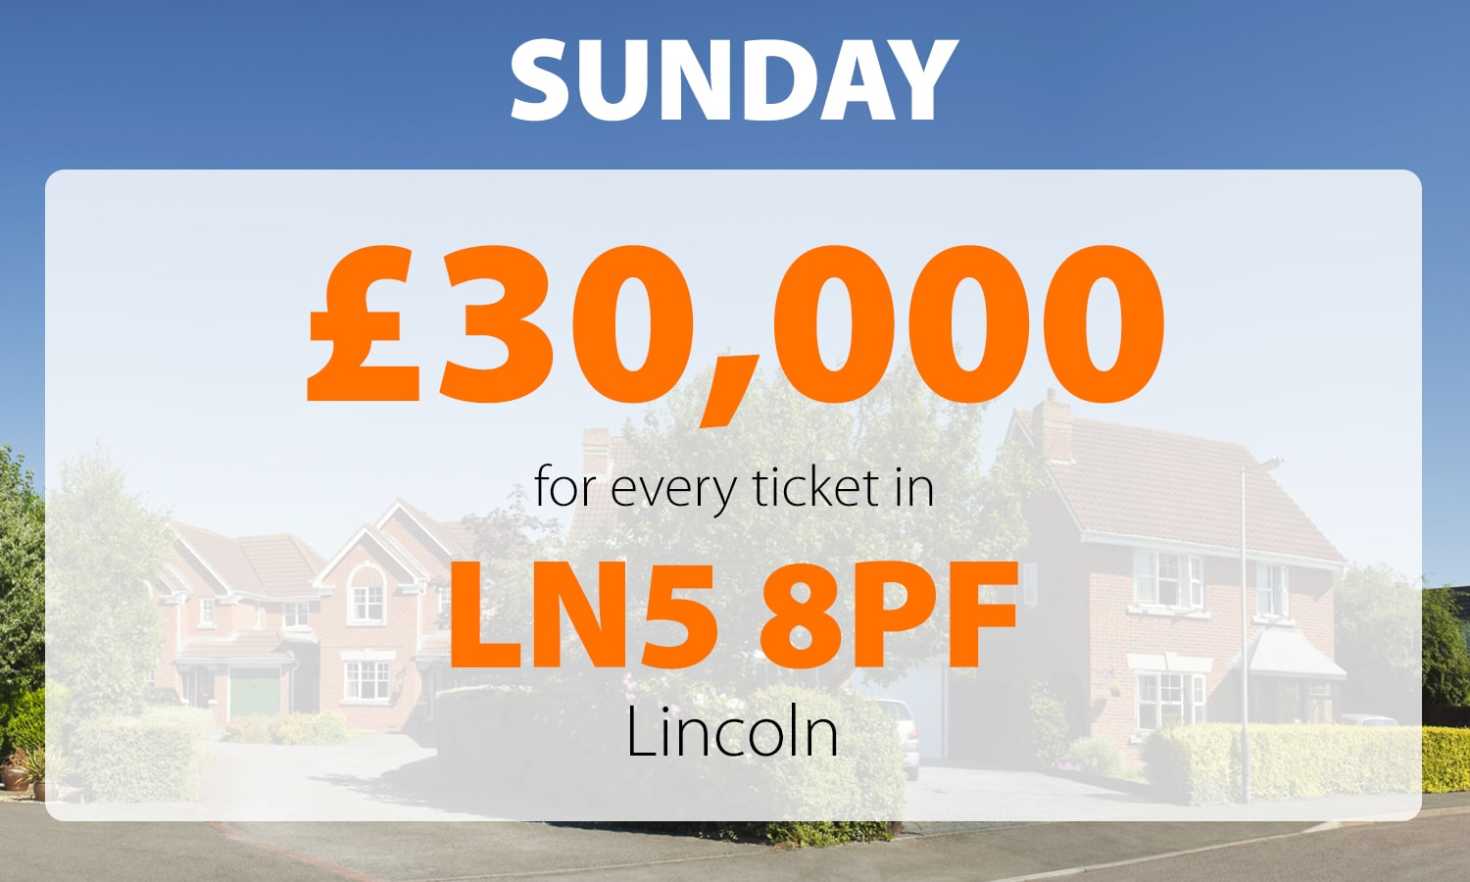 Three lucky players in Lincoln won a superb £30,000 each in Sunday's Street Prize